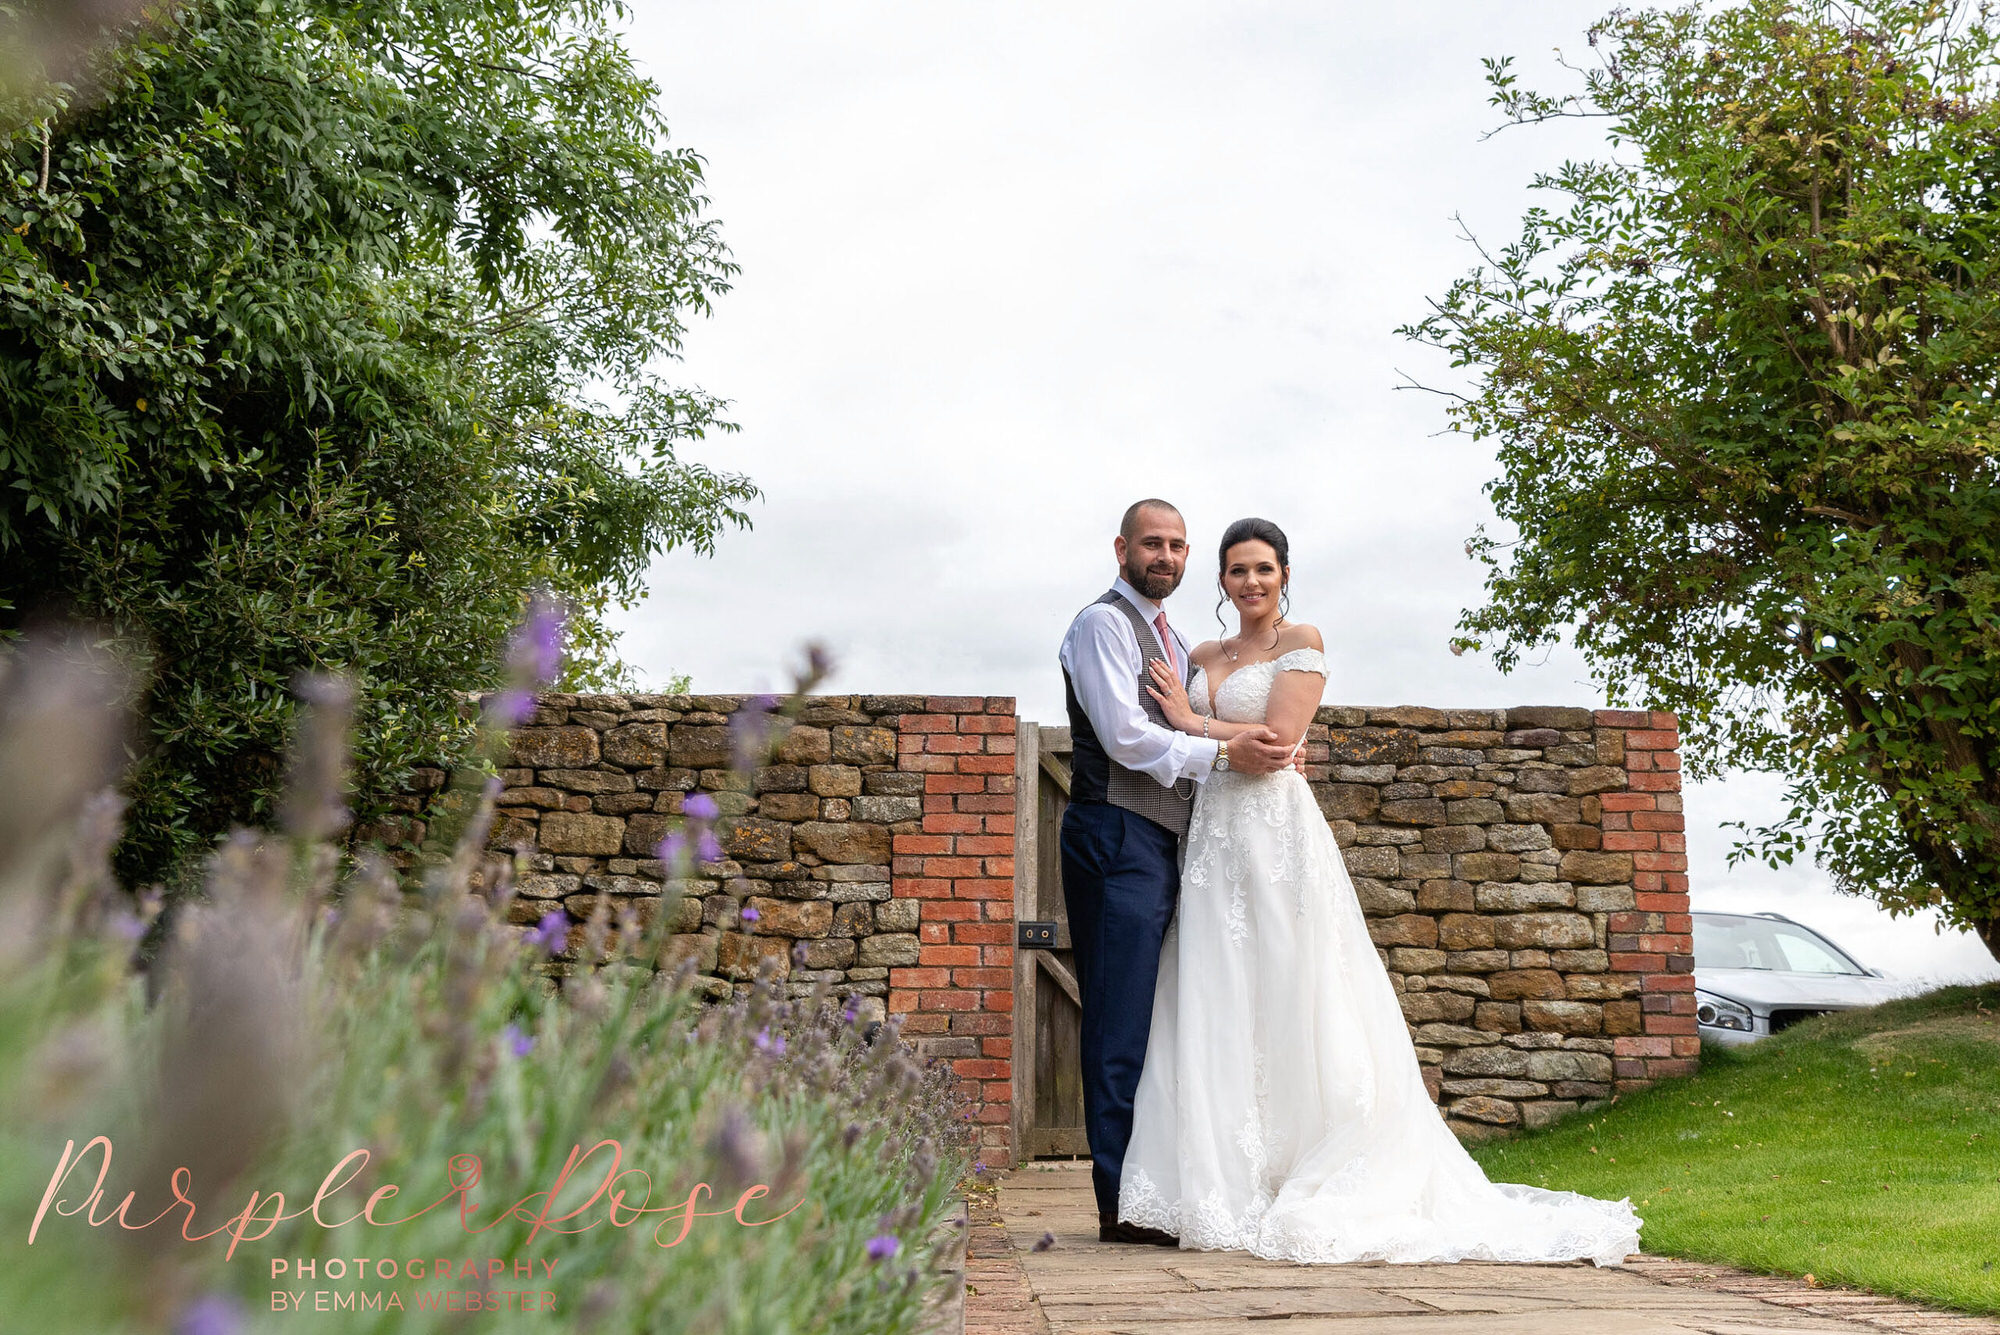 Bride and groom stood by lavender in a garden